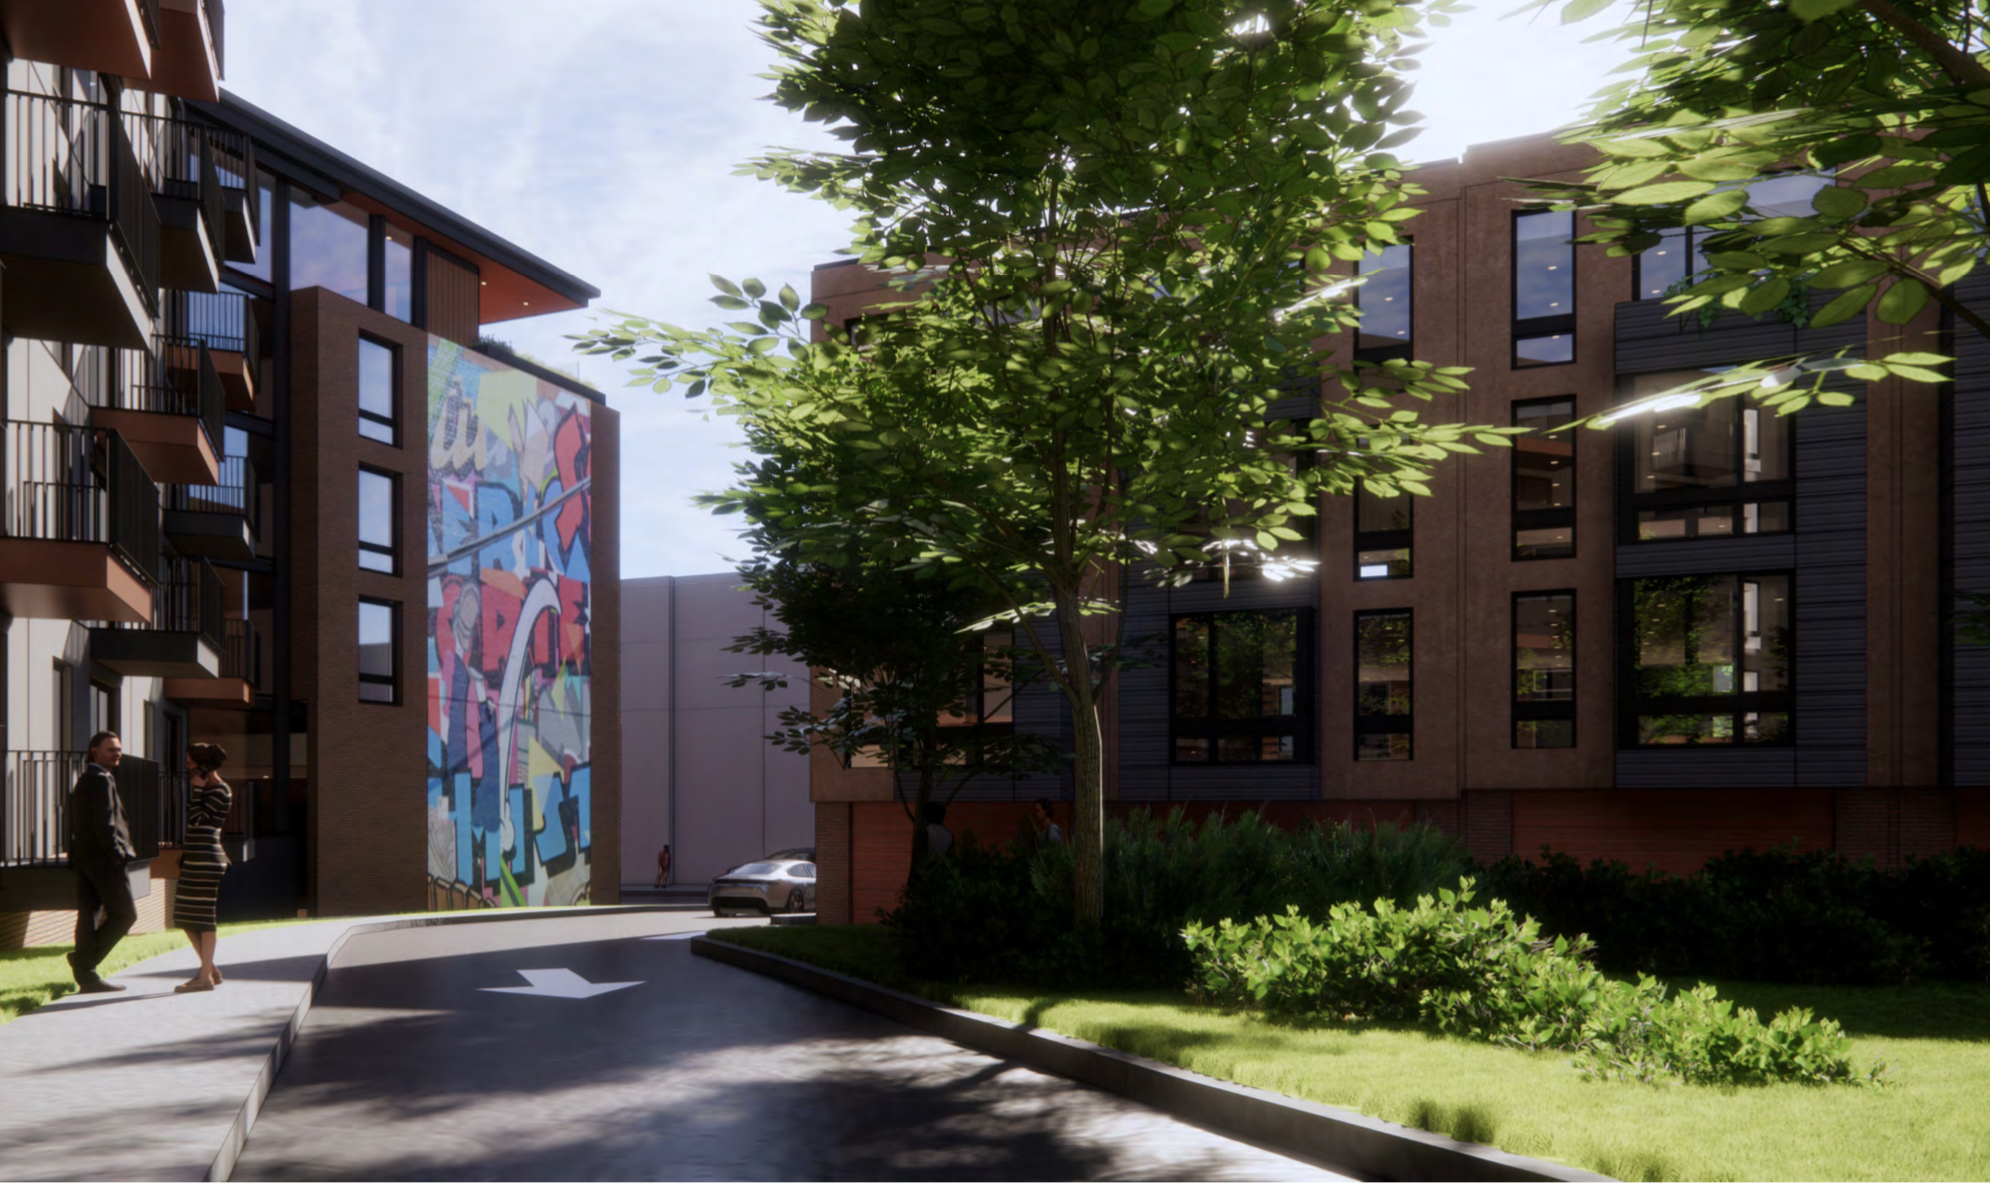 Rendering of 801 North 19th Street. Credit: NORR.